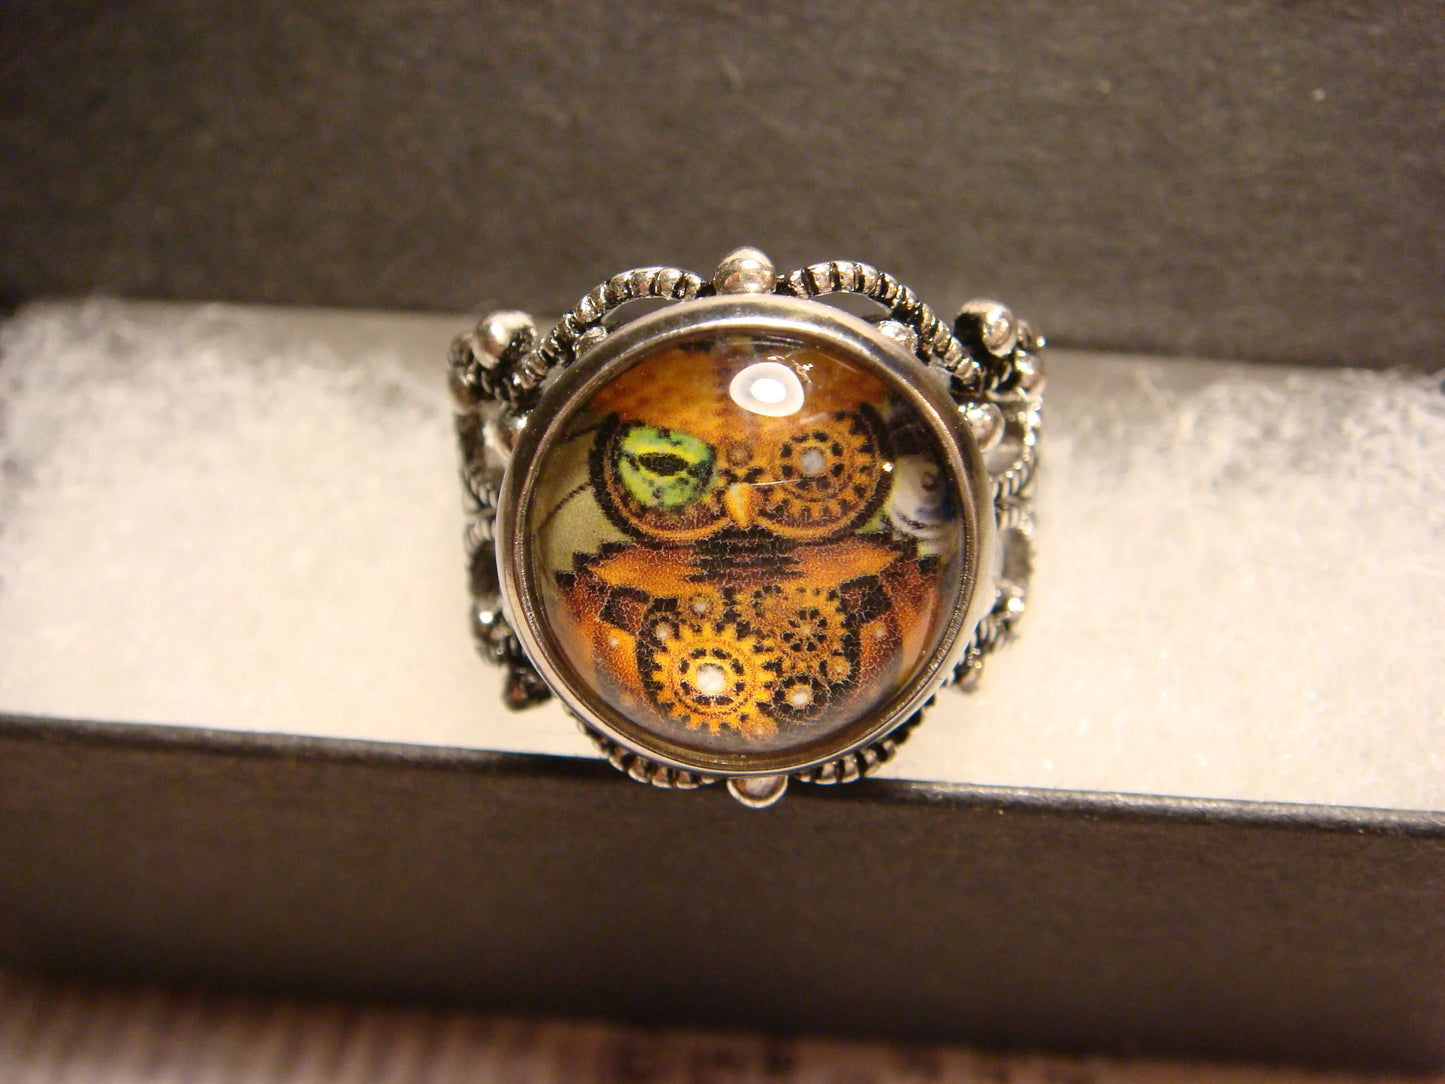 Steampunk Owl Image Filigree Ring in Antique Silver - Adjustable